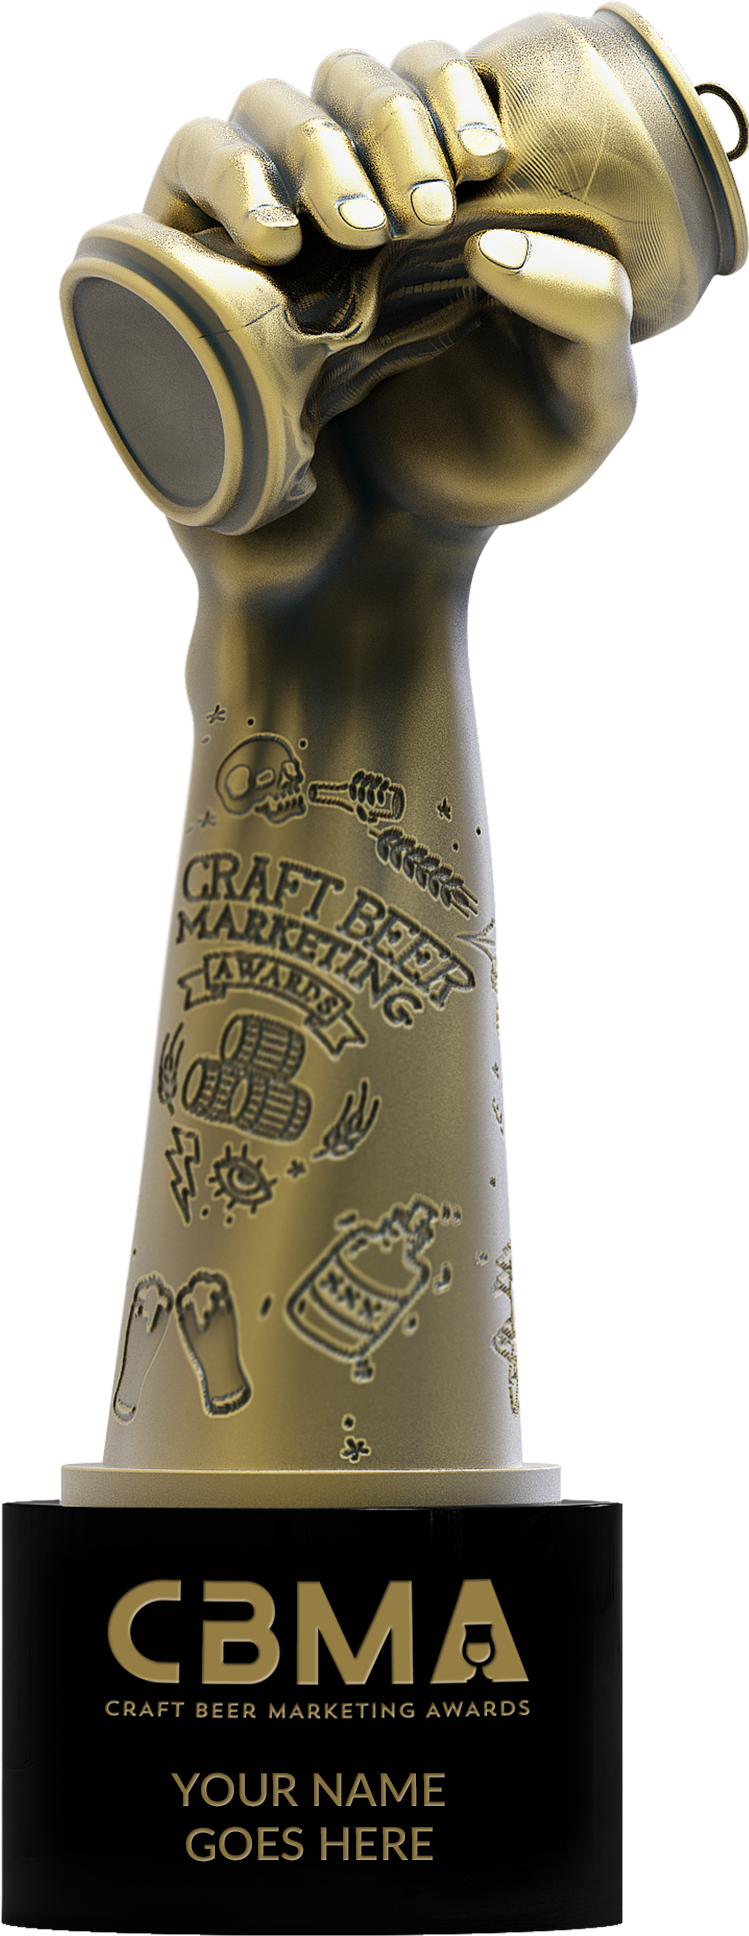 Best Beer In The World 2021 Learn More About the Crushie Awards | Craft Beer Marketing Awards